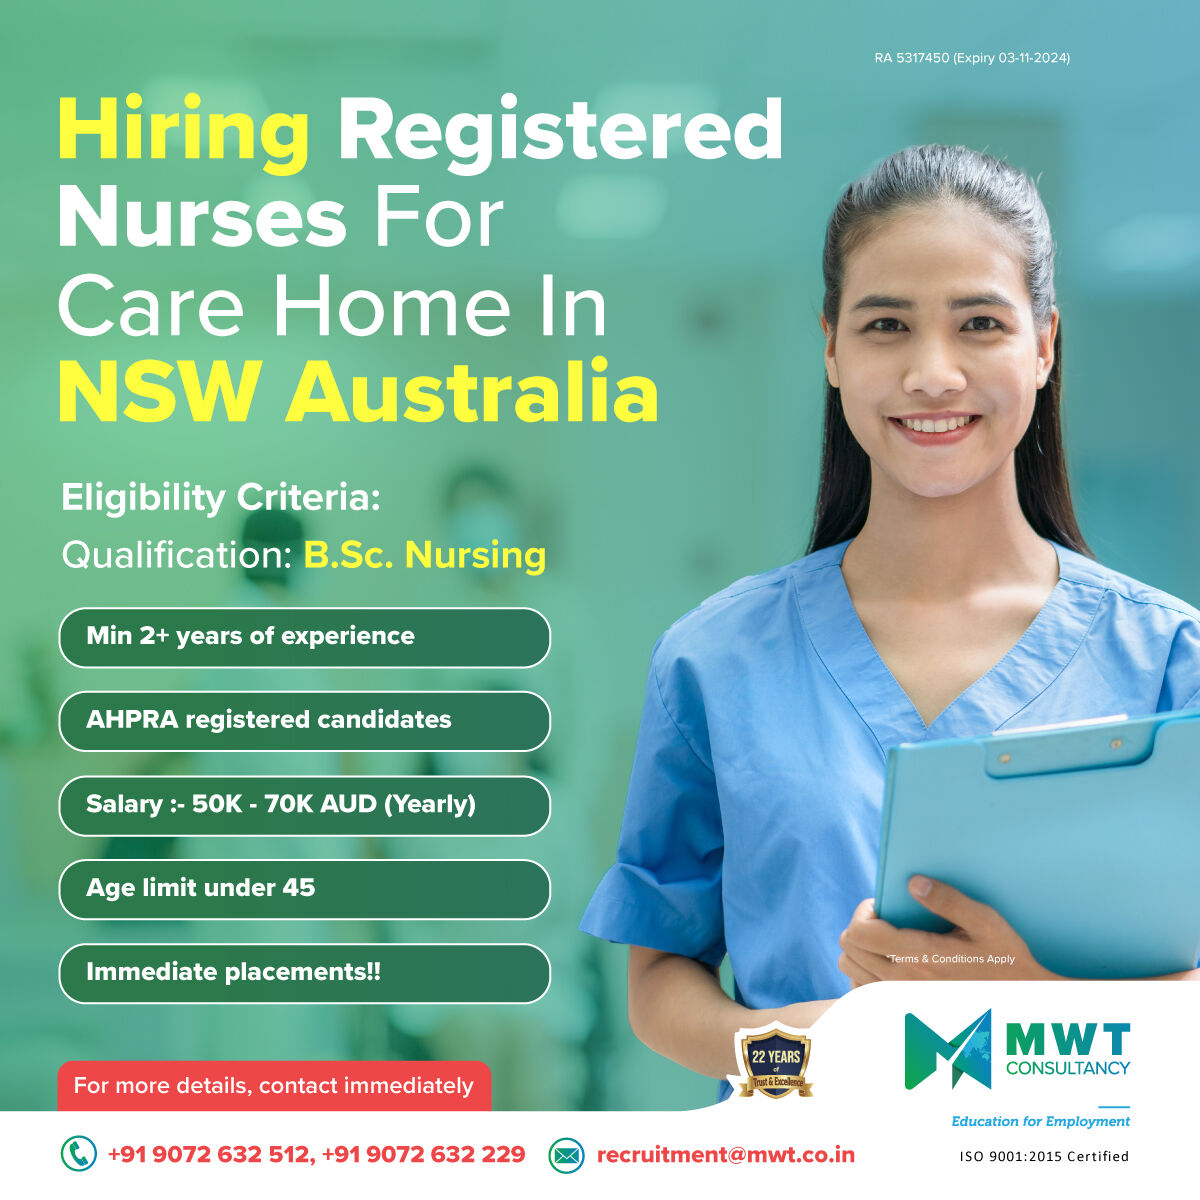 Nursing excellence wanted! 🏥💙

Competitive salary and immediate placements available. 

Apply today!

📞+91 9072 632 512, +91 9072 632 229
📧recruitment@mwt.co.in

#mwtconsultancy #HealthcareJobs #NursingOpportunity #educationconsultancy